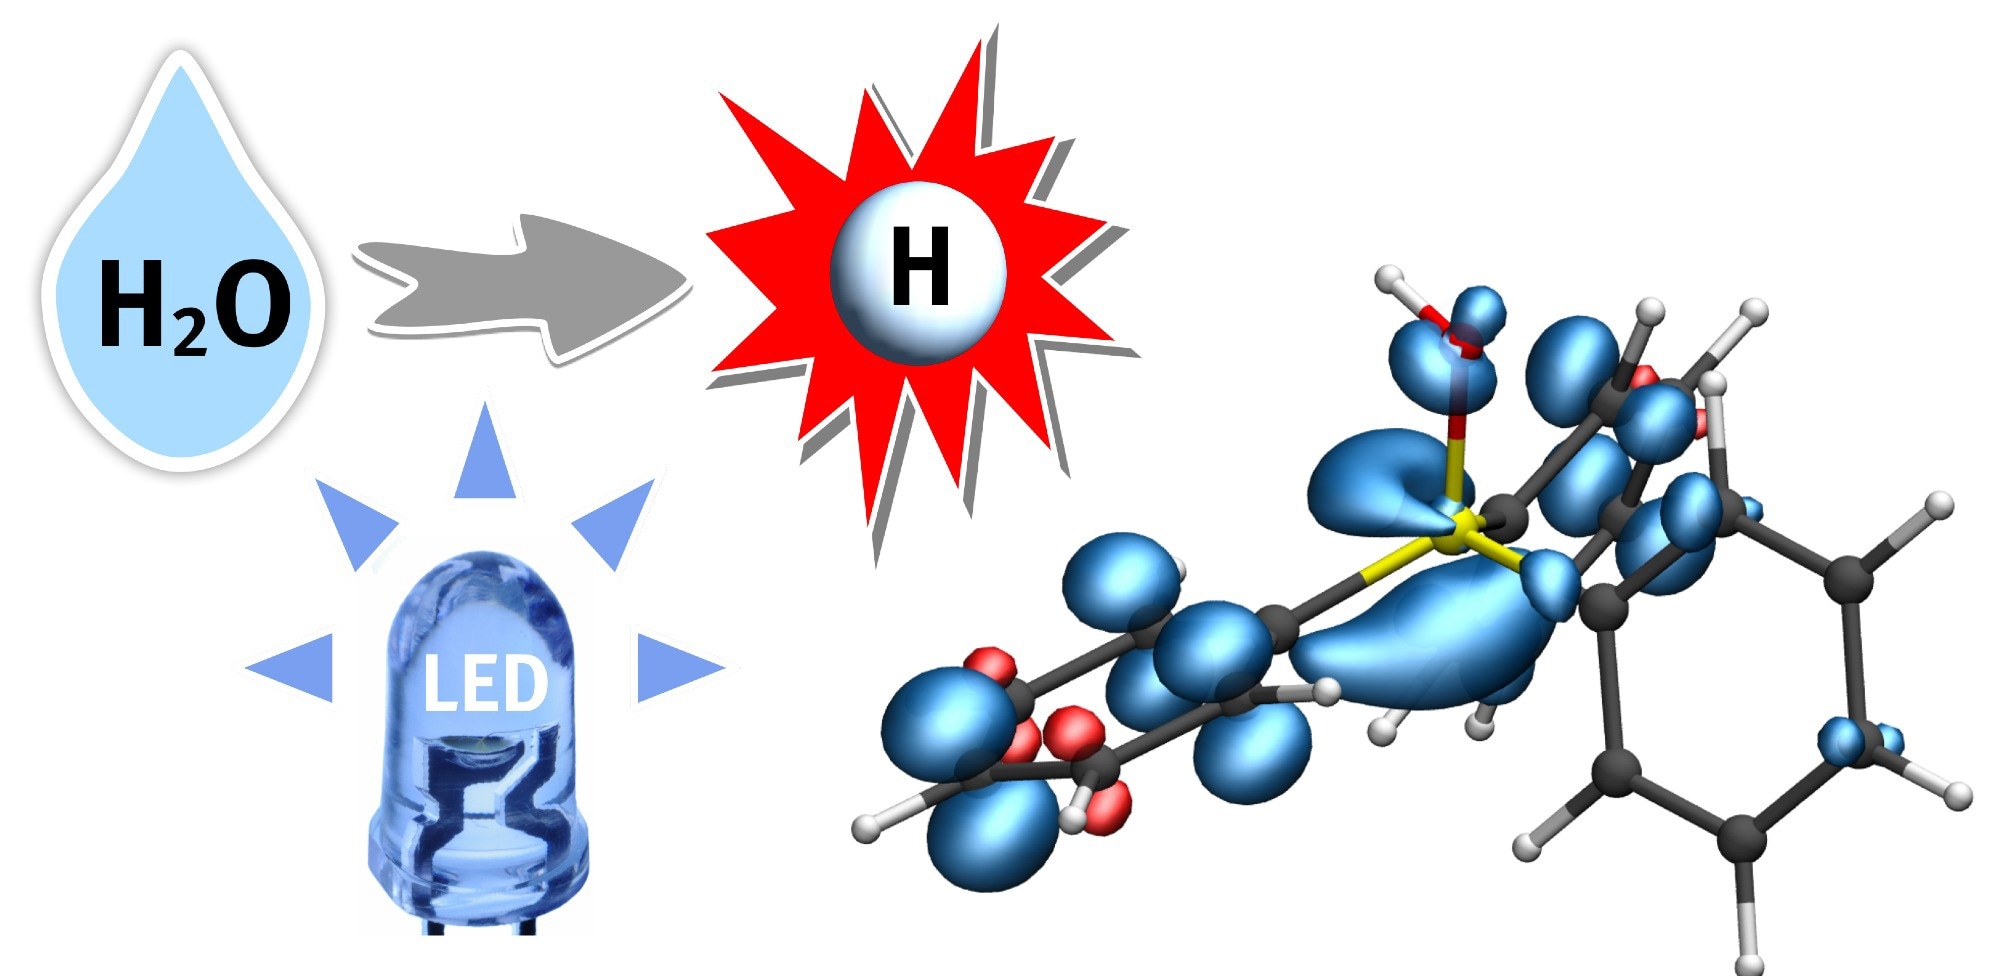 A hydrogen atom (H) from water (H2O) is transferred to a phosphine-water radical cation under the supply of light energy (LED). This important radical intermediate can further transfer the hydrogen atom (white) to the substrate. The blue regions indicate the electron spin distribution.